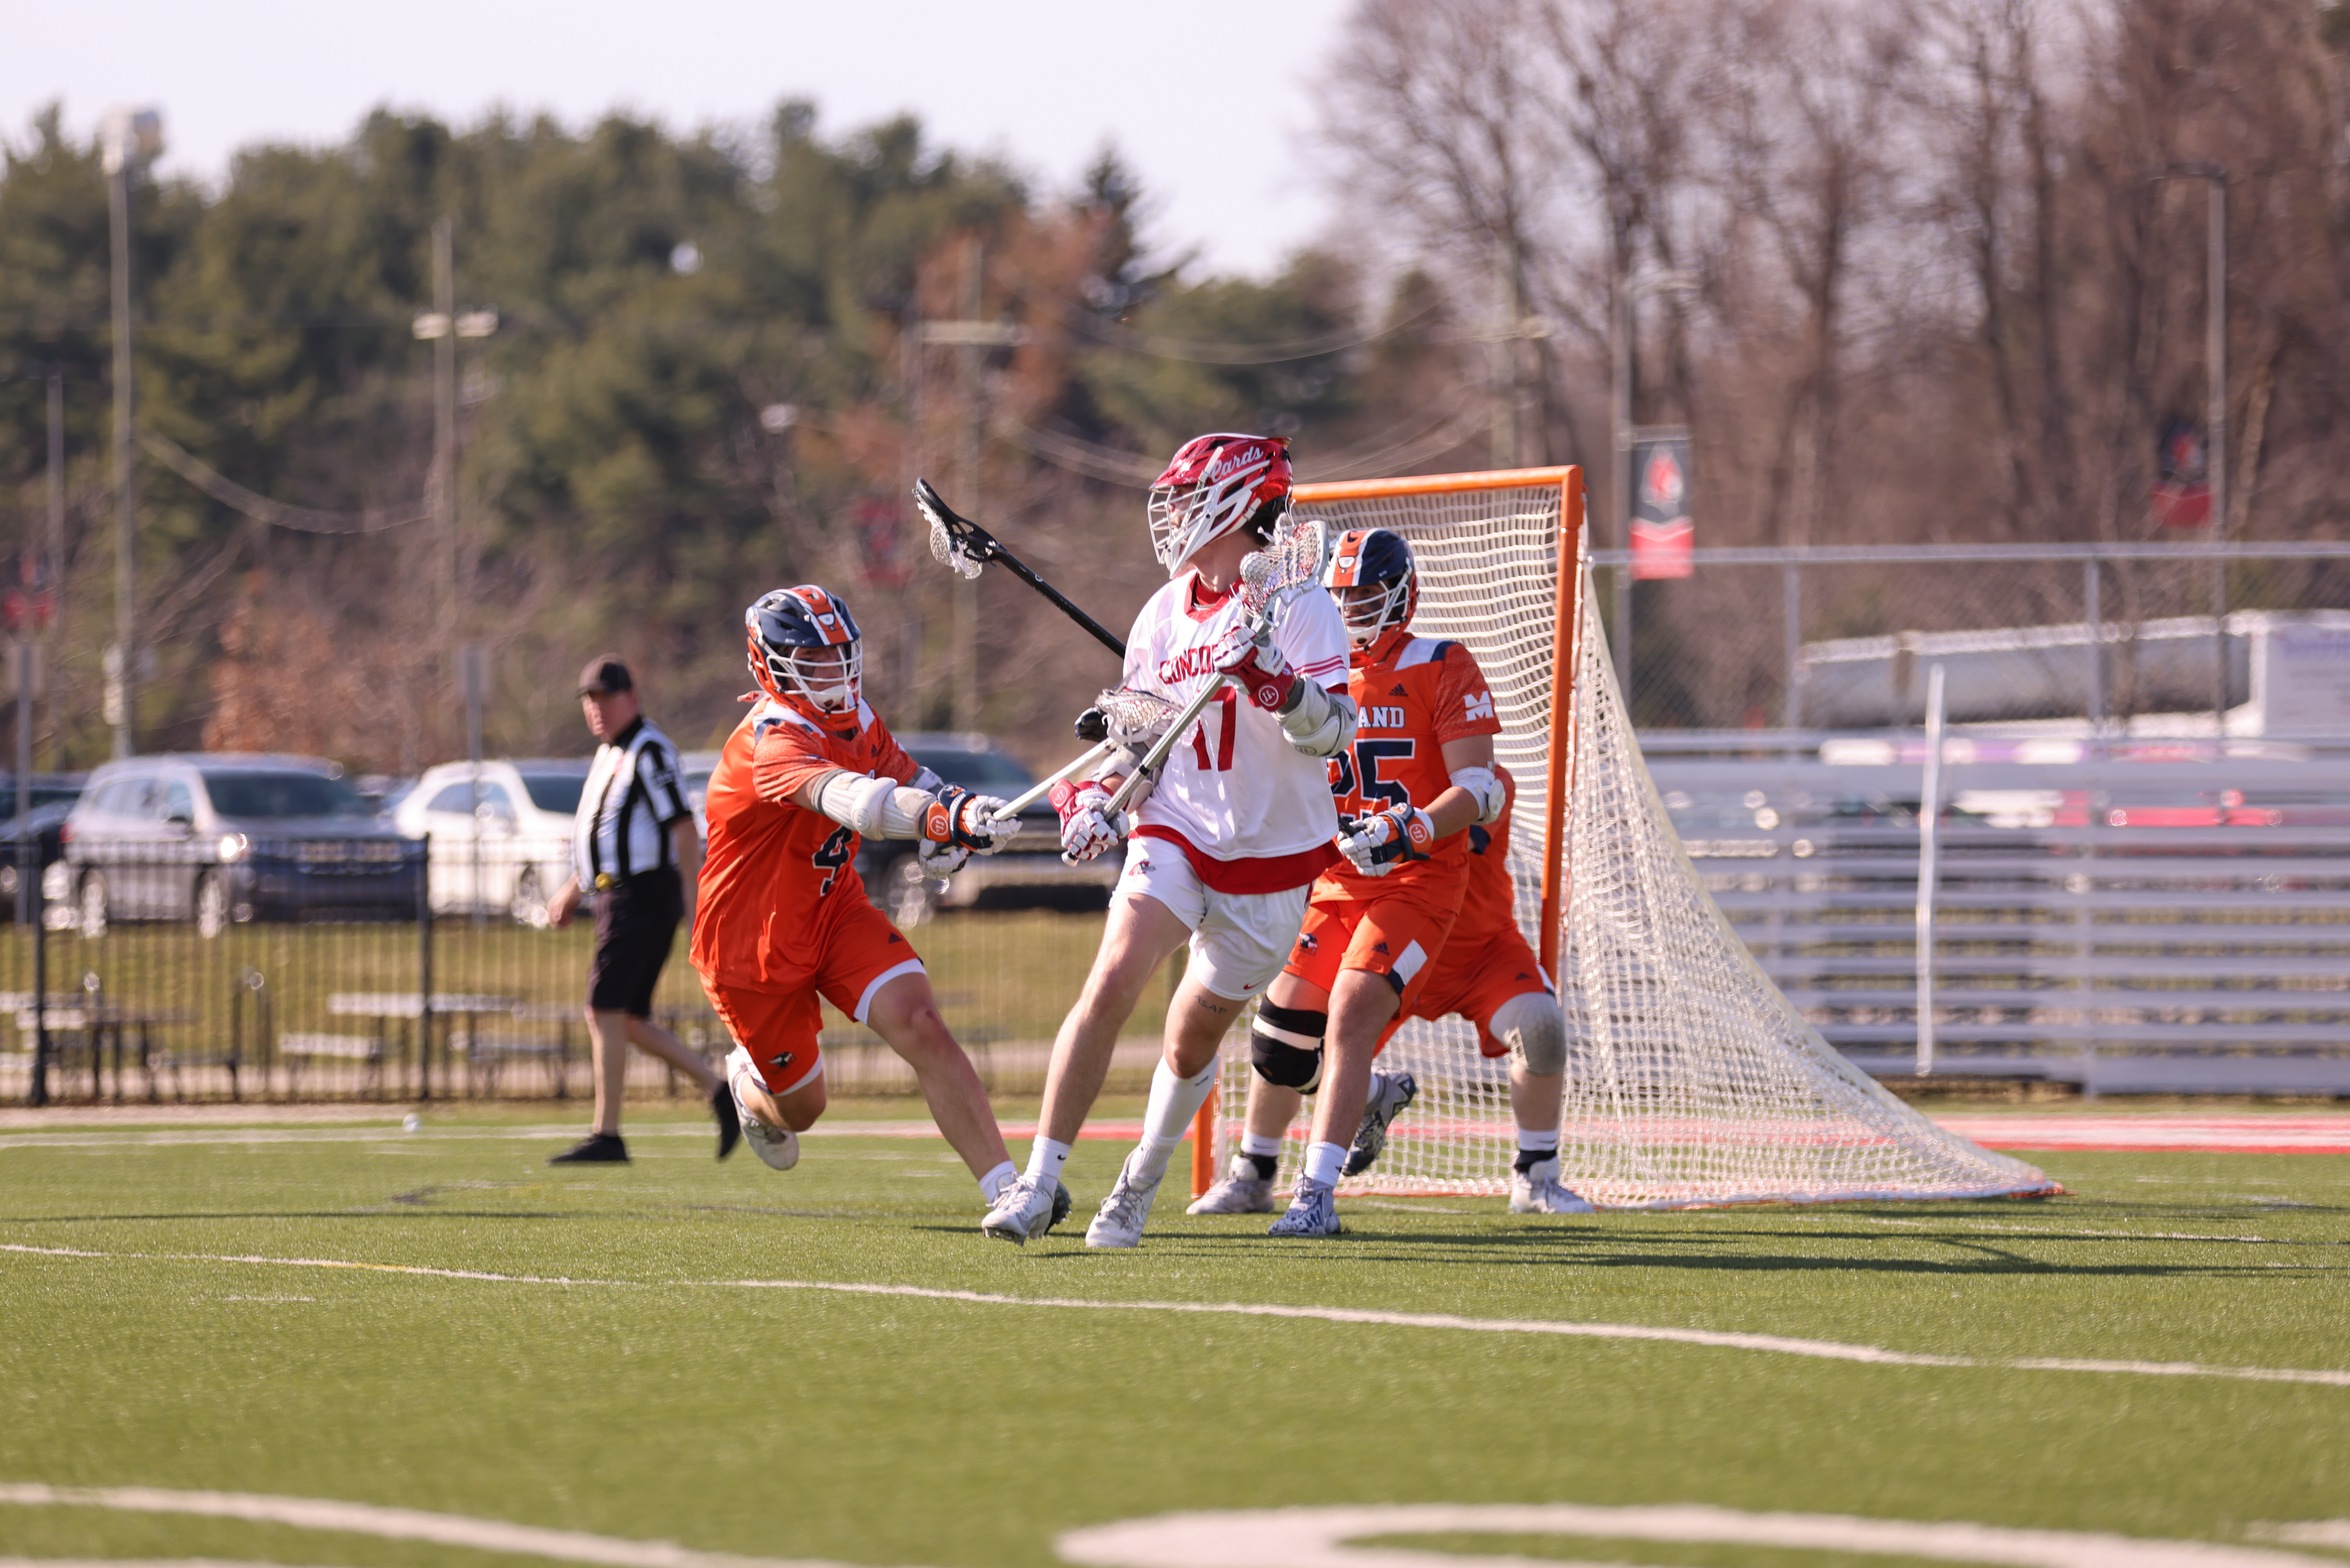 Men's Lacrosse sets new program record with 34-1 rout of Midland